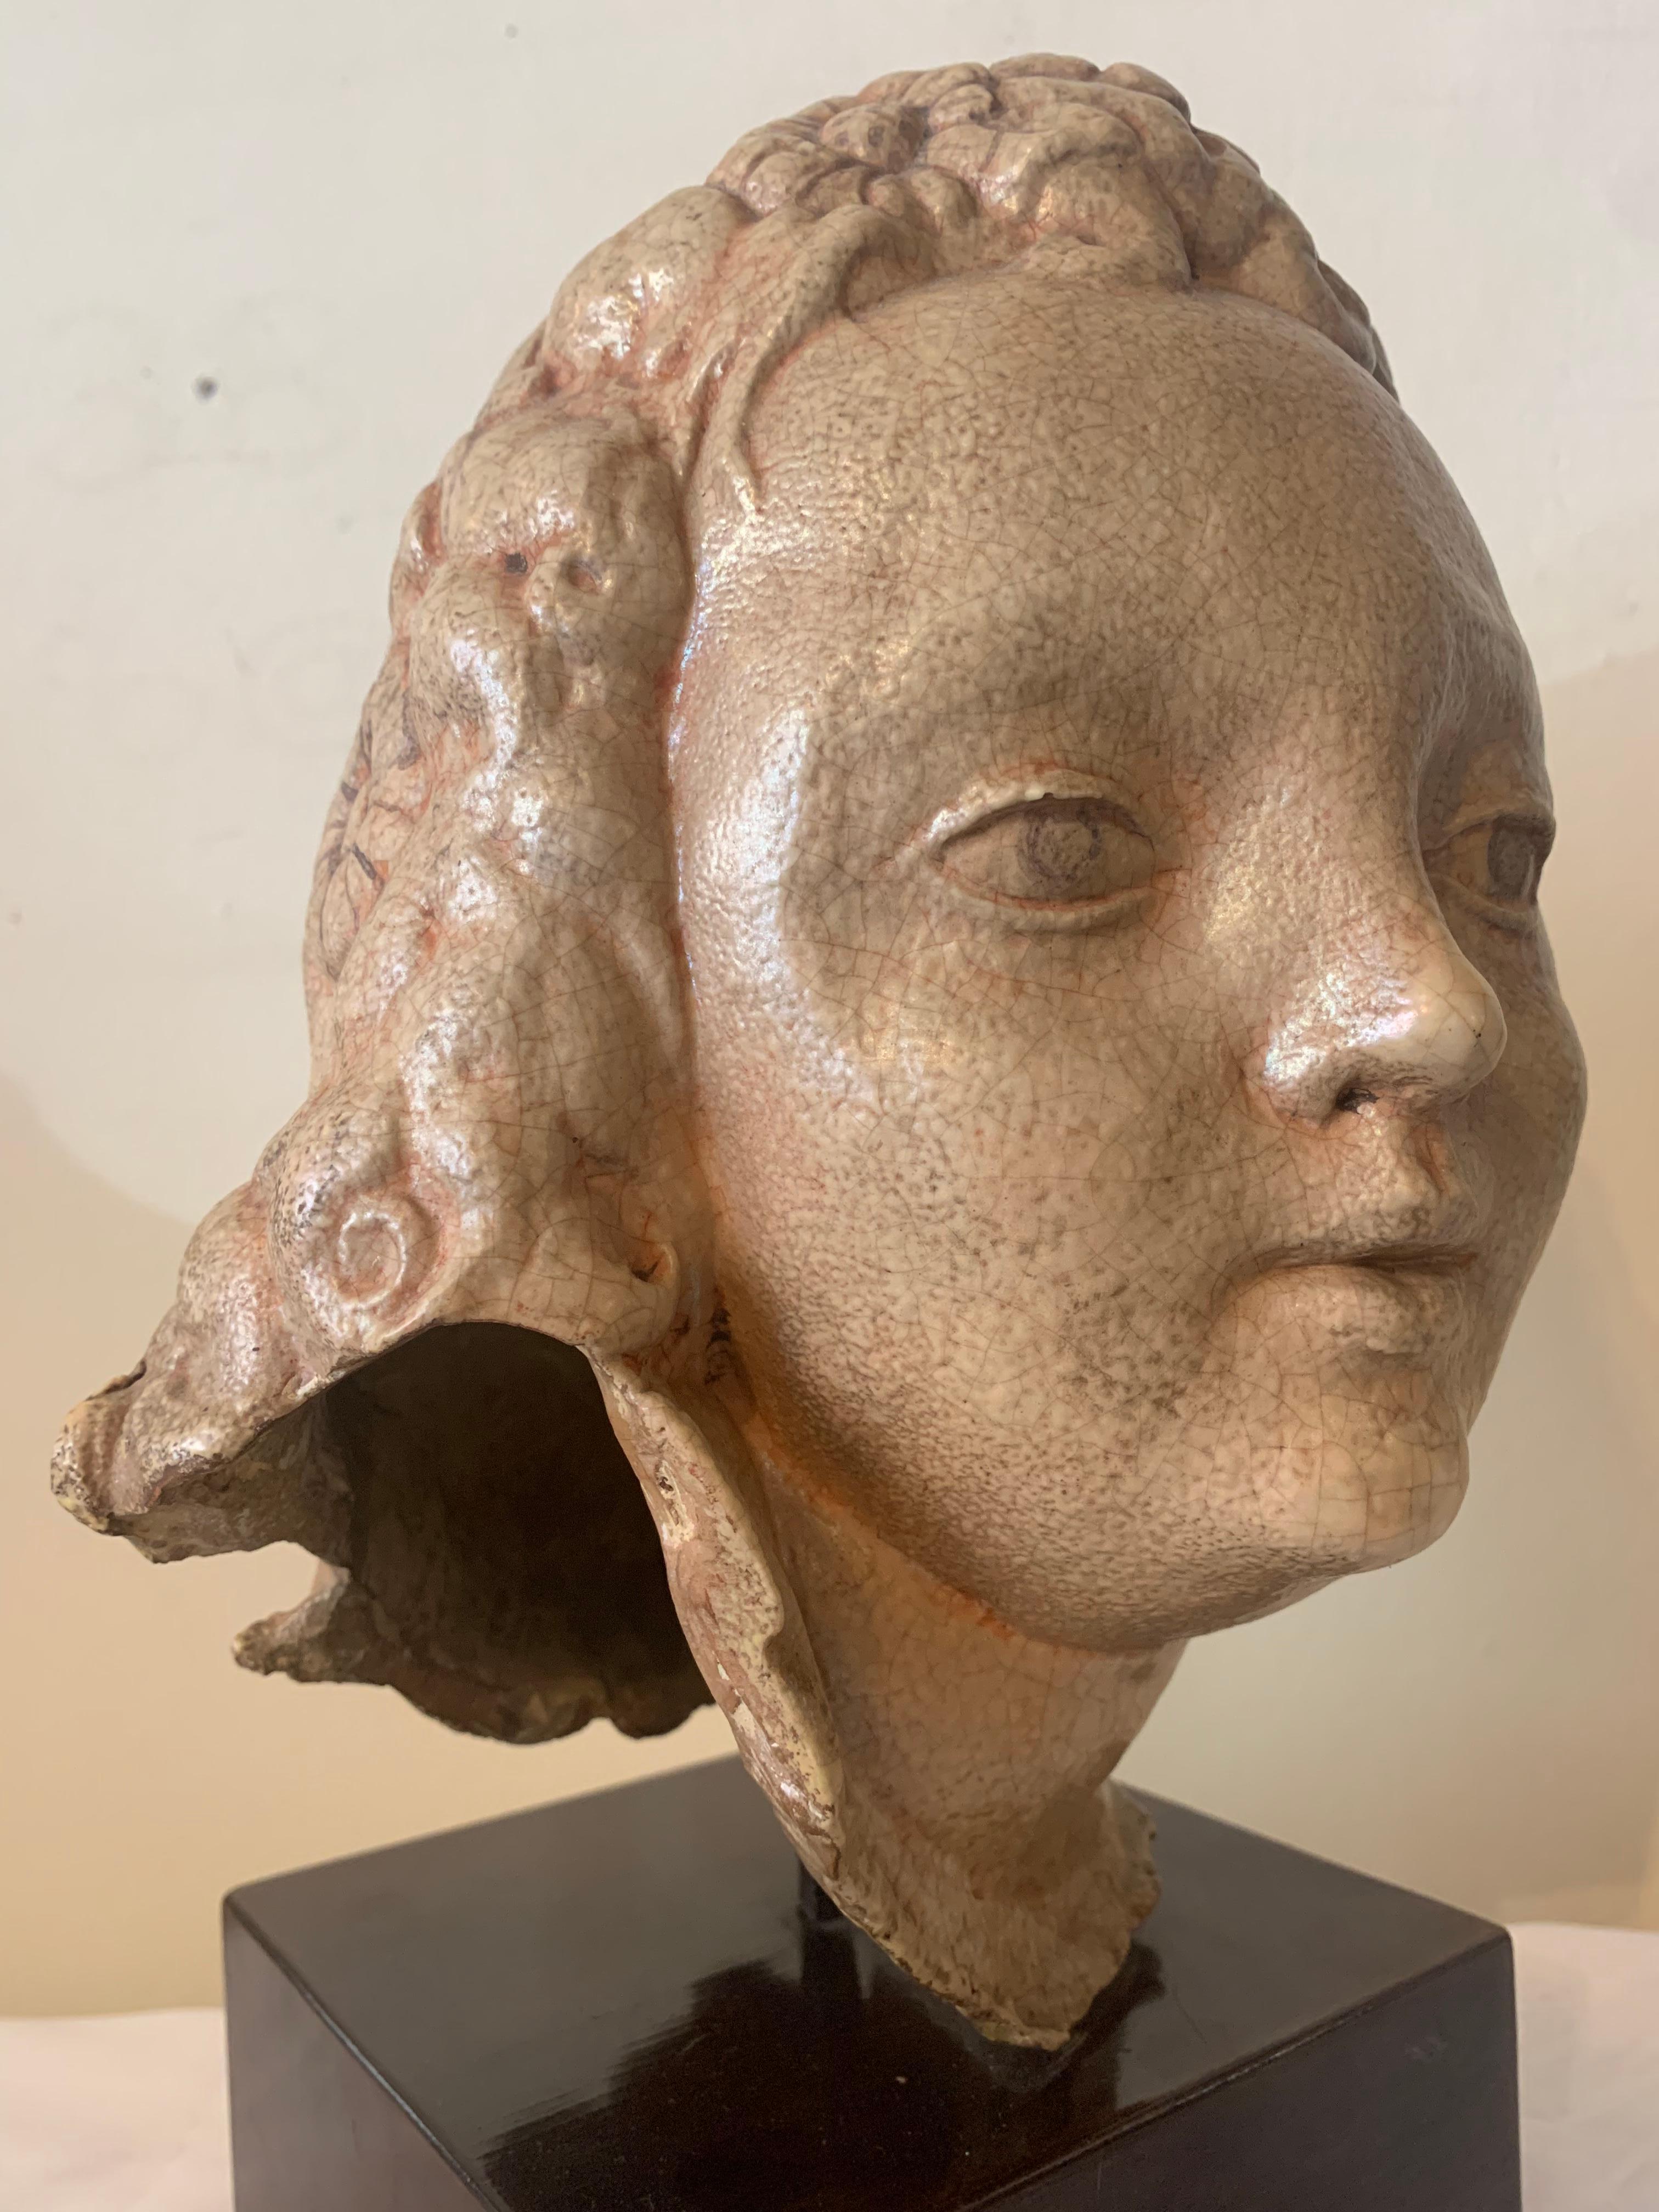 Ceramic head of a young girl, version from the 1960s.

Pietro Melandri, Faenza (1885-1976). One of the most known experimental ceramic Artist, influenced by estetics of Art Nouveau and Art Deco. 

During his artistic career, Pietro Melandi created